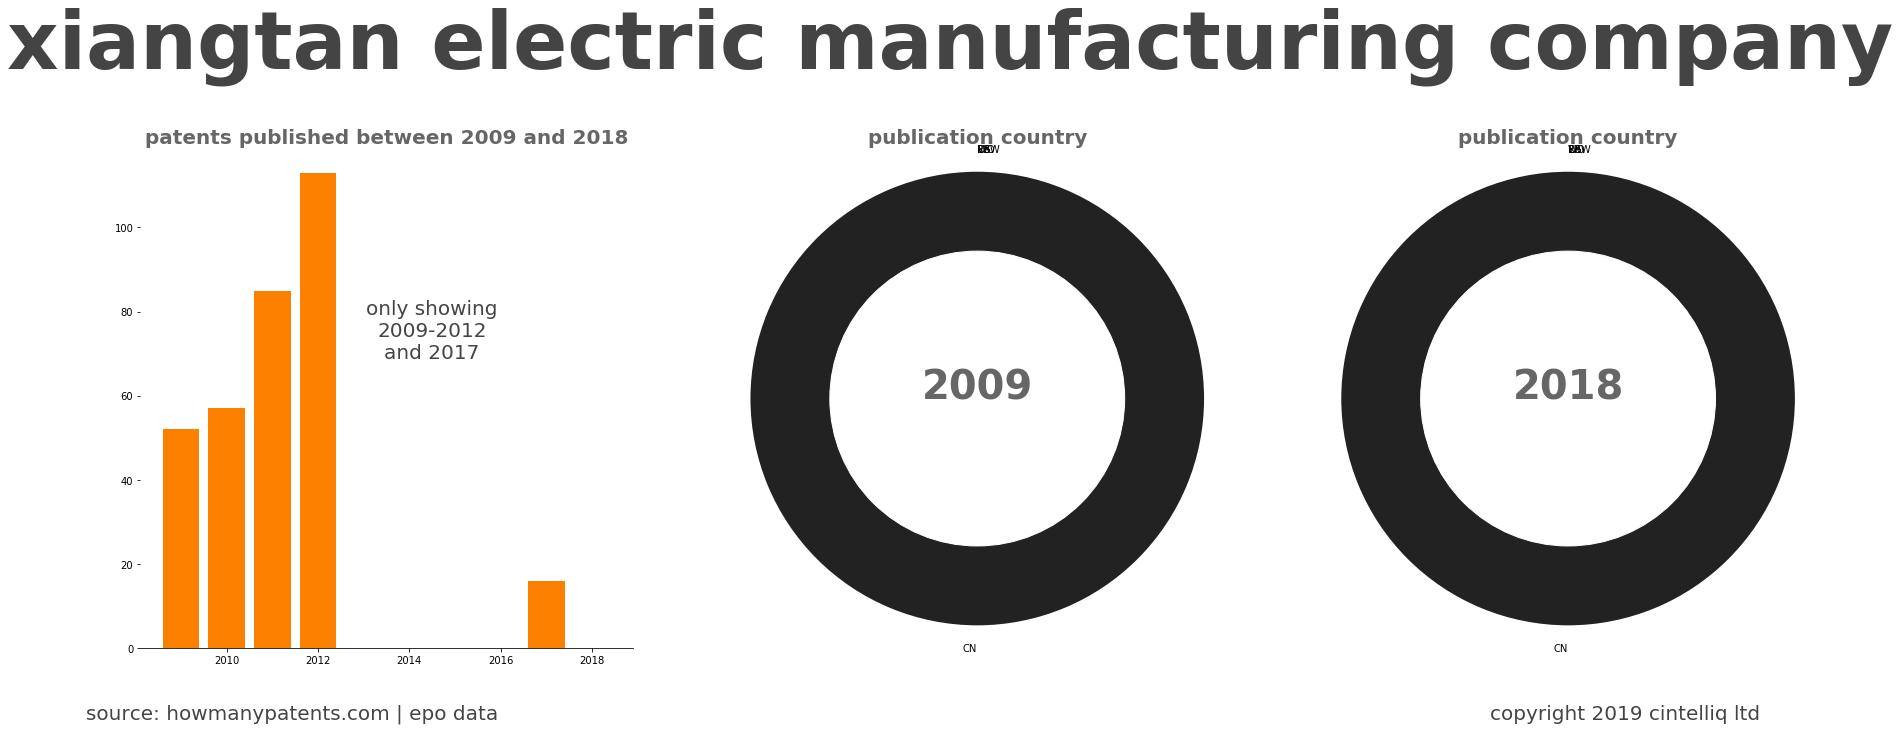 summary of patents for Xiangtan Electric Manufacturing Company